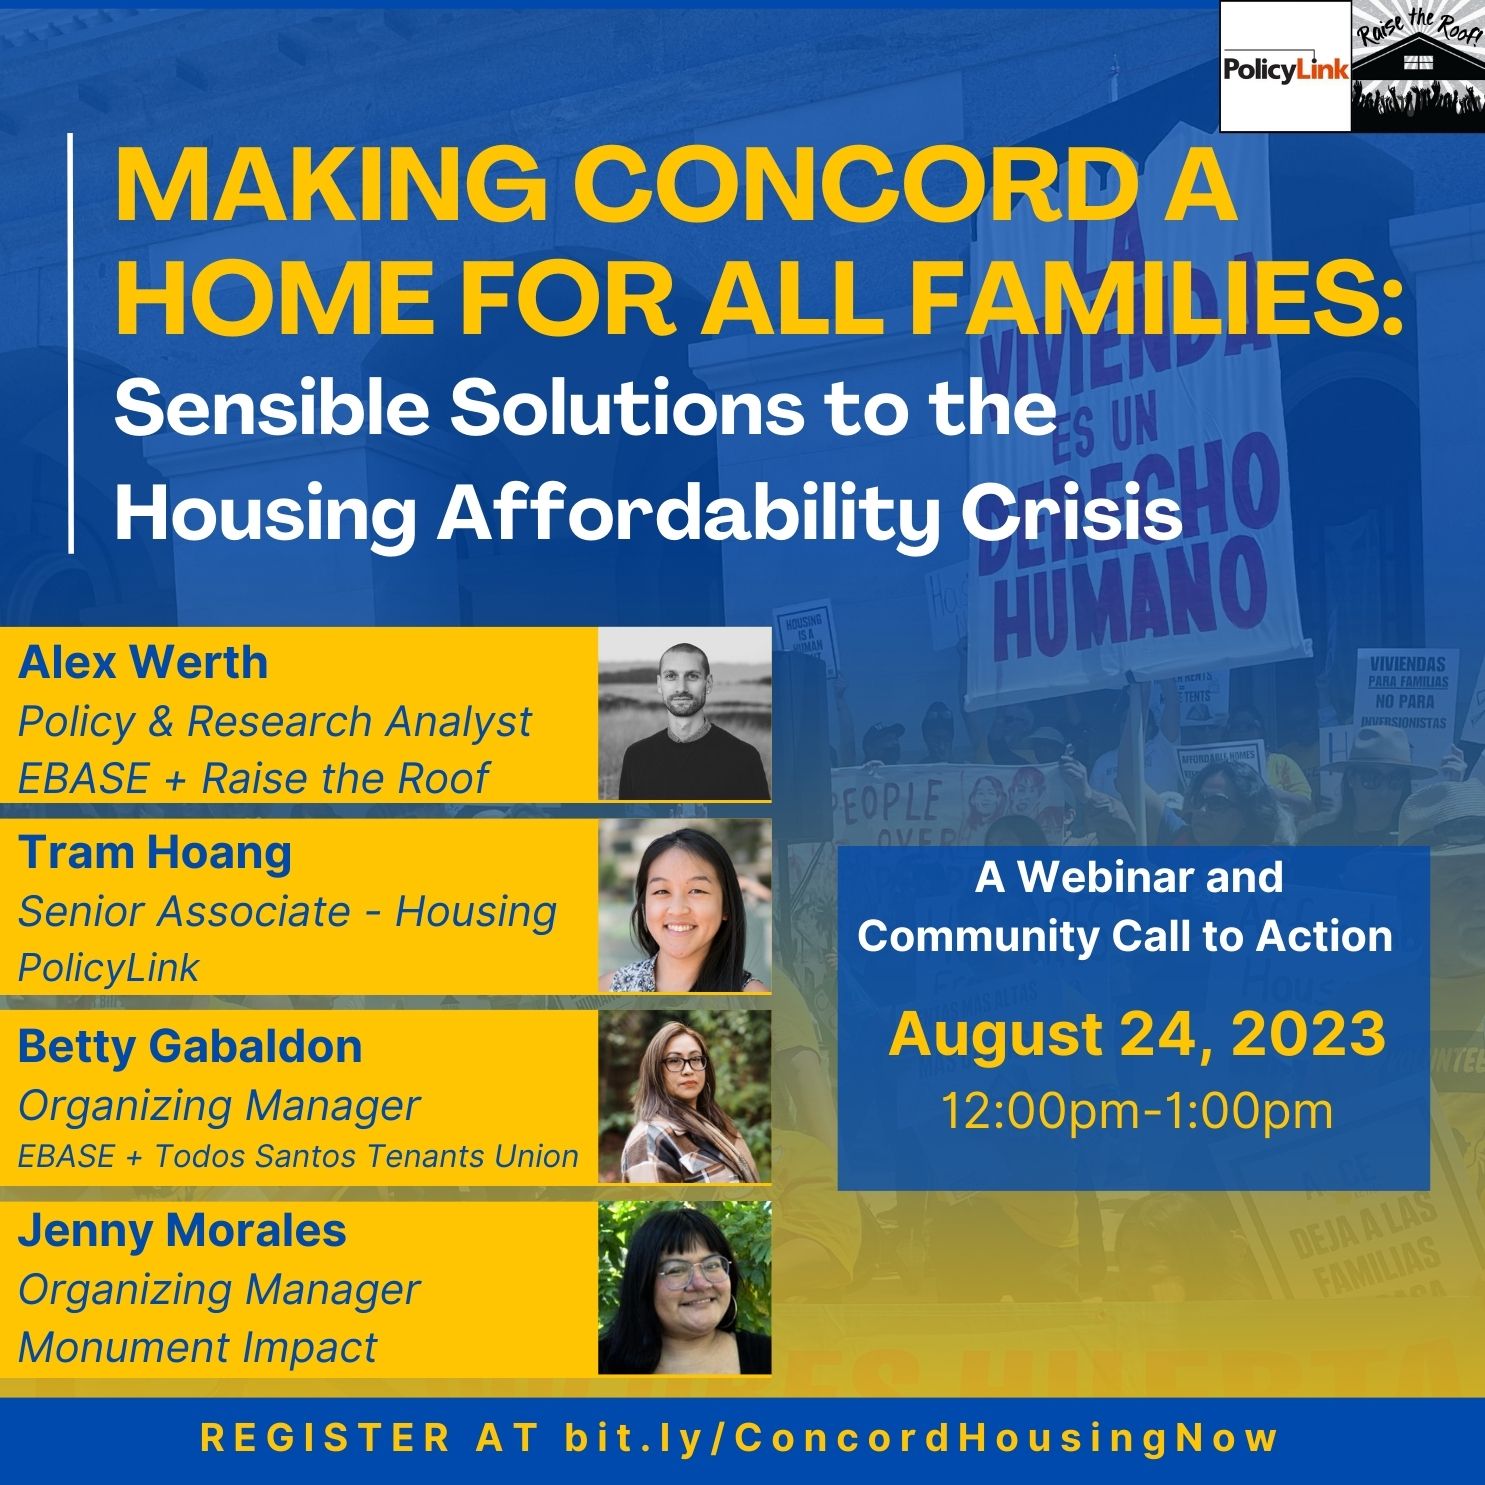 Making Concord A Home For All Families: Sensible Solutions to the Housing Affordability Crisis A webinar and community call to action August 24, 2023 12:00 pm - 1:00 pm Featuring Alex Werth, EBASE; Betty Gabaldon, EBASE & Todo Santos Tenants Union; Jenny Morales, Monument Impact; Tram Hoang, PolicyLink Register at bit.ly/ConcordHousingNow